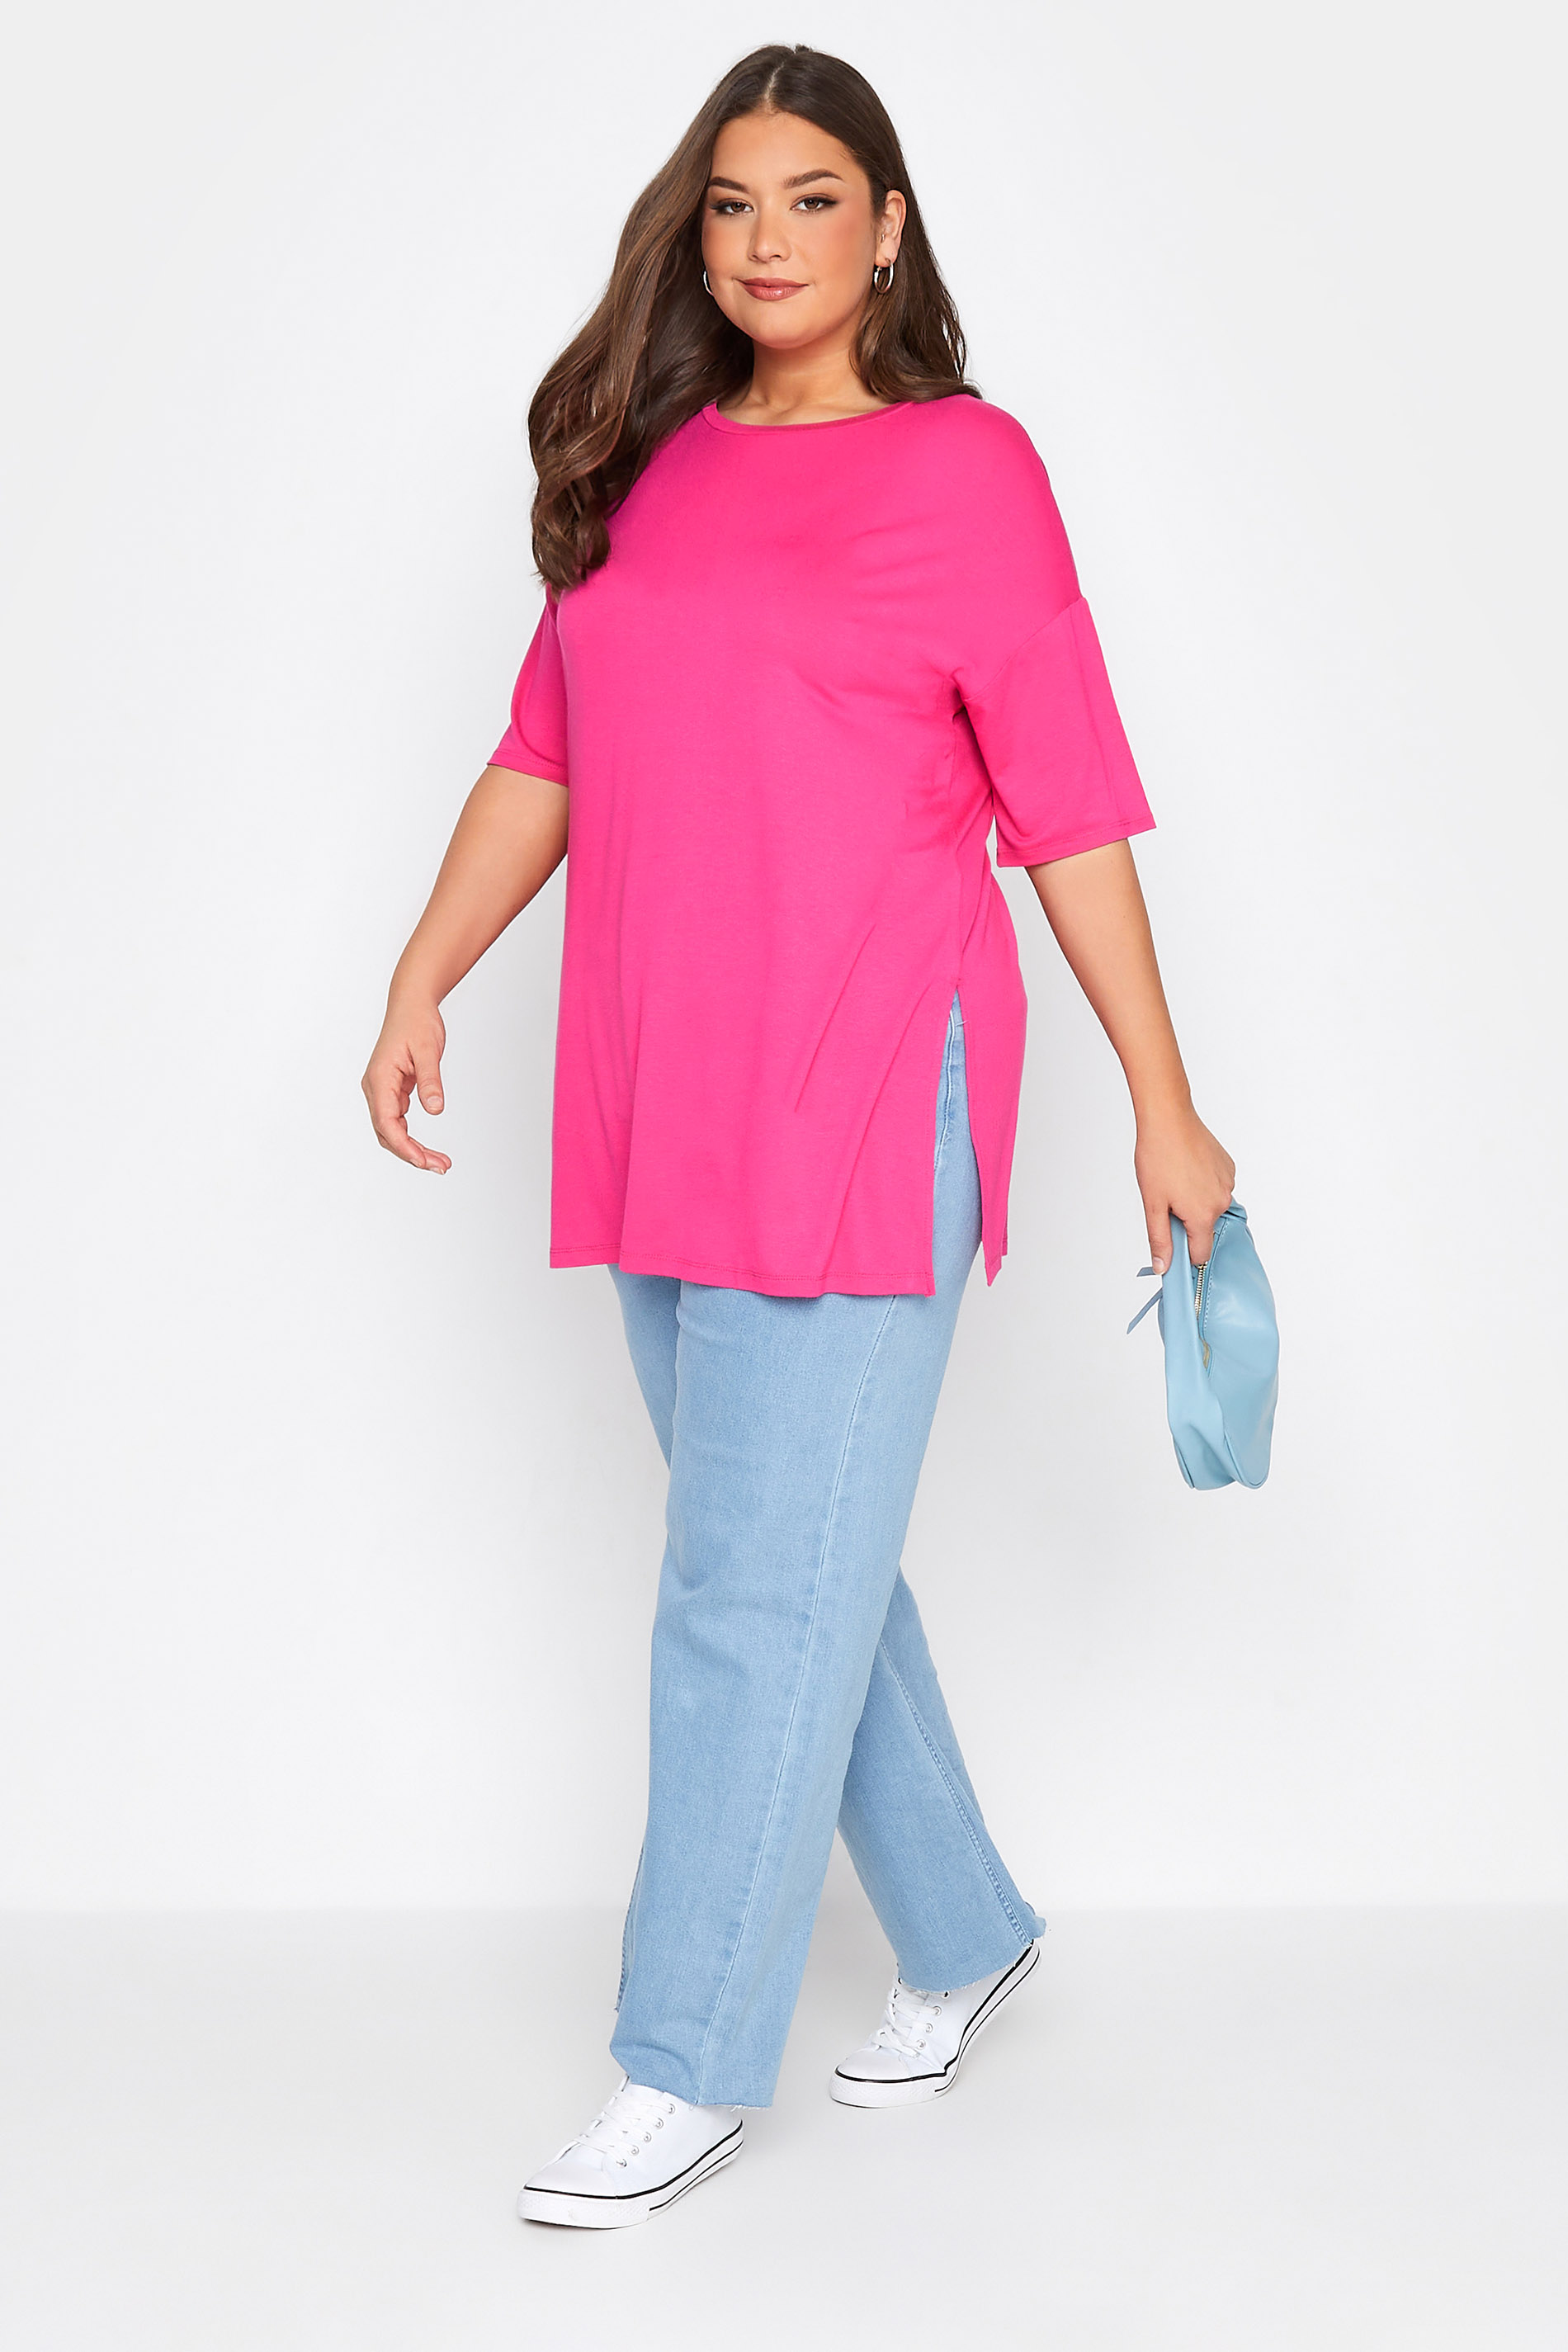 Grande taille  Tops Grande taille  Tops Casual | T-Shirt Rose Design Oversize en Jersey - PW90324